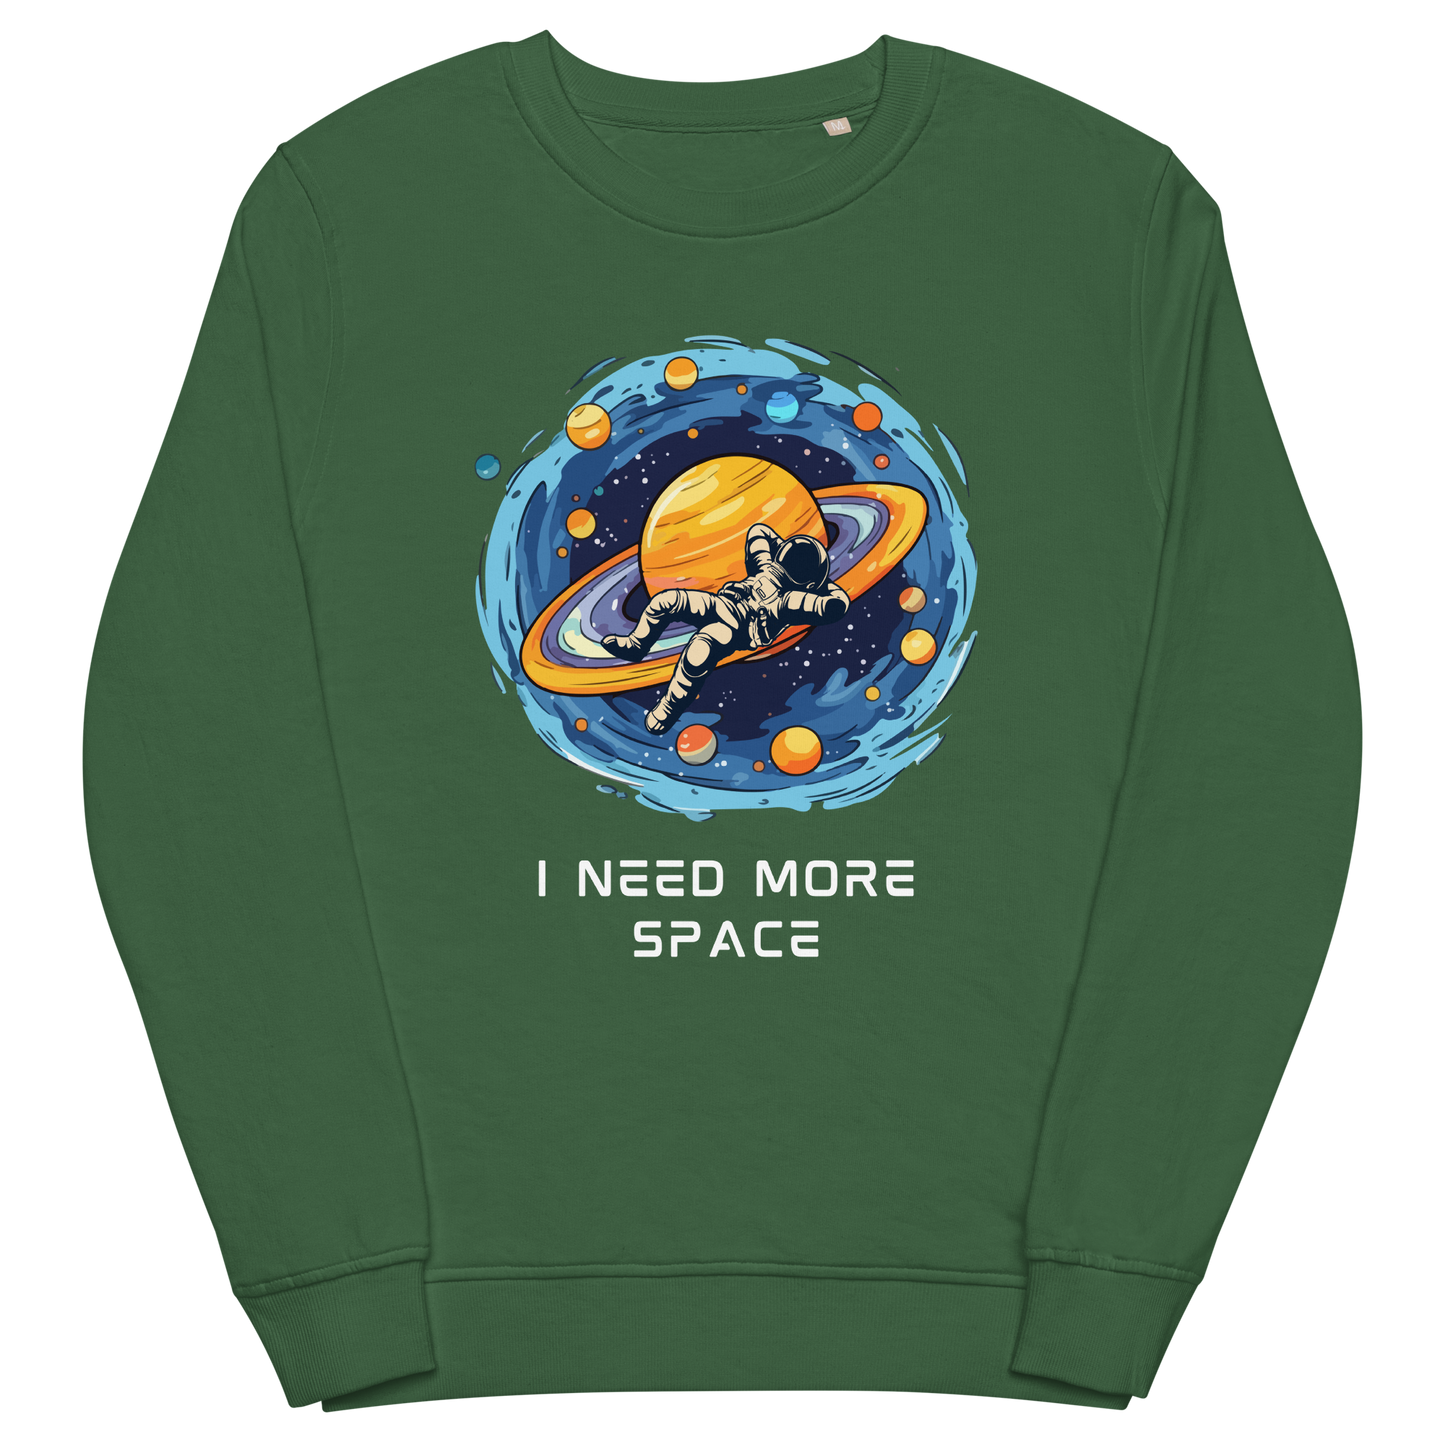 Bottle Green Organic Cotton Astronaut Sweatshirt featuring a captivating I Need More Space graphic on the chest - Funny Graphic Space Sweatshirts - Boozy Fox